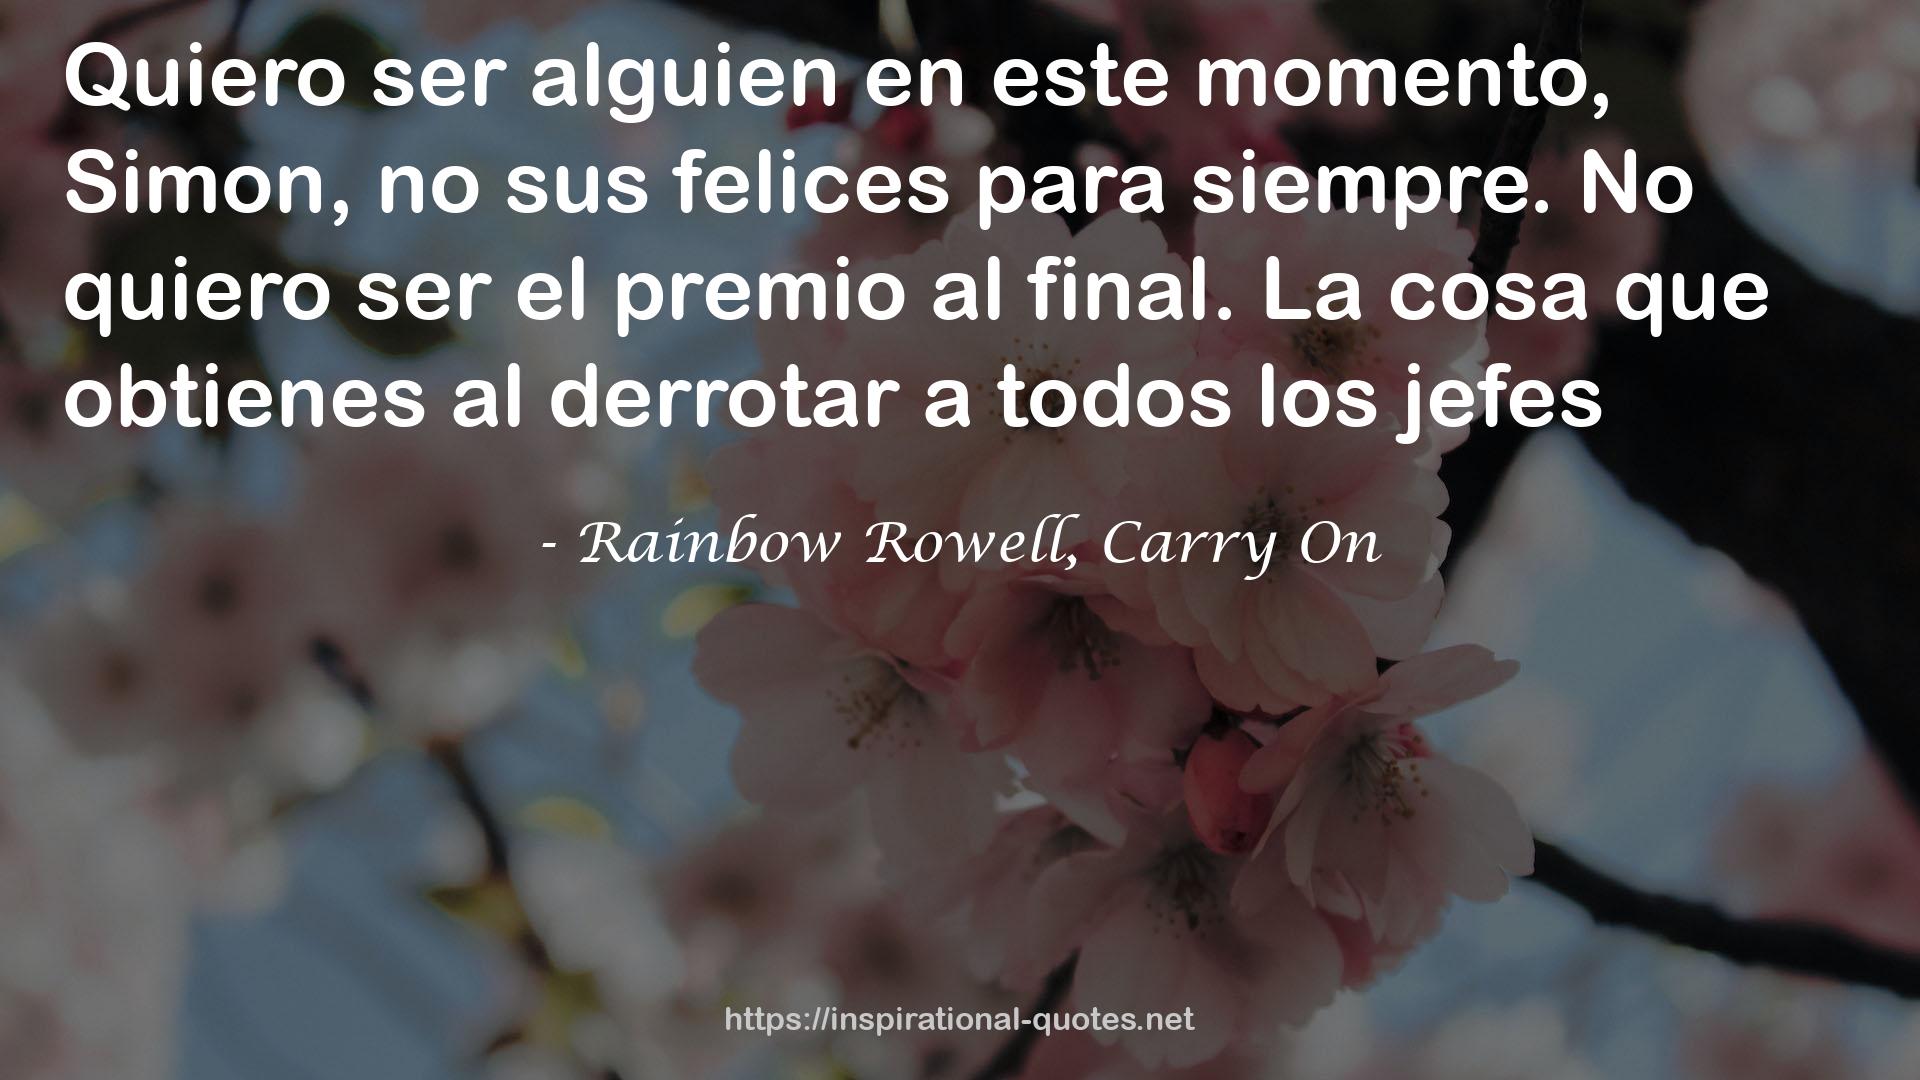 Rainbow Rowell, Carry On QUOTES